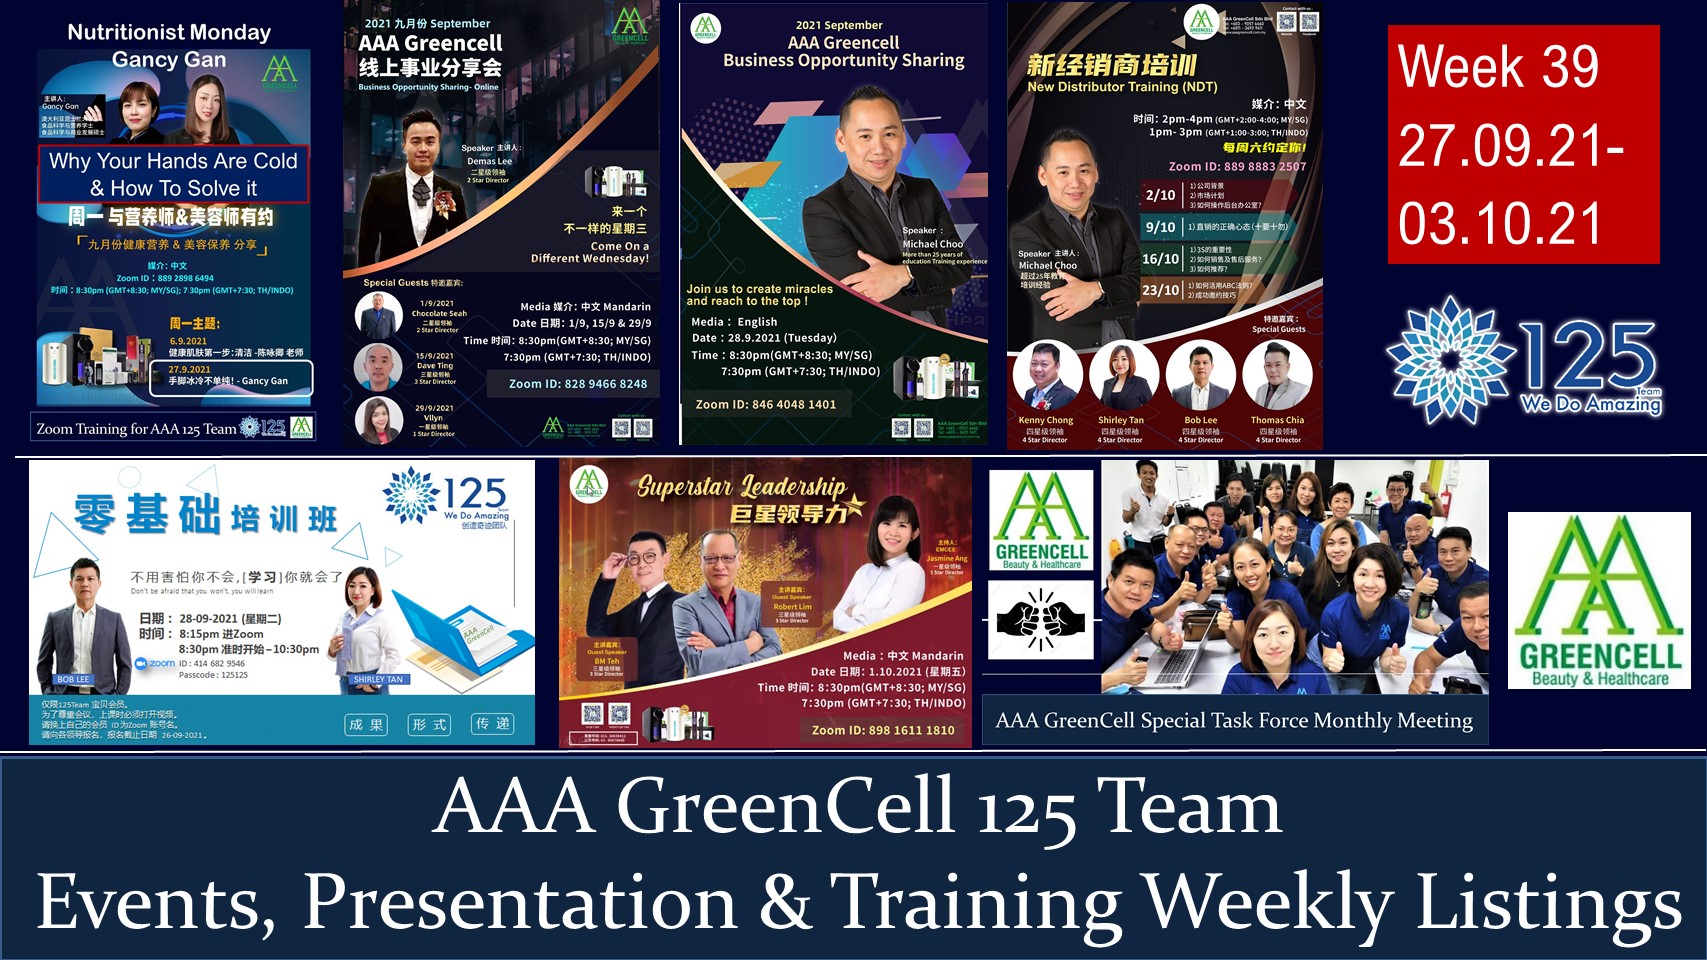 AAA GreenCell 125 Team Events, Presentation and Training for Week 39. Dates 27.09.21-03.10.21. Hydrogen Qhydrogen Giap One